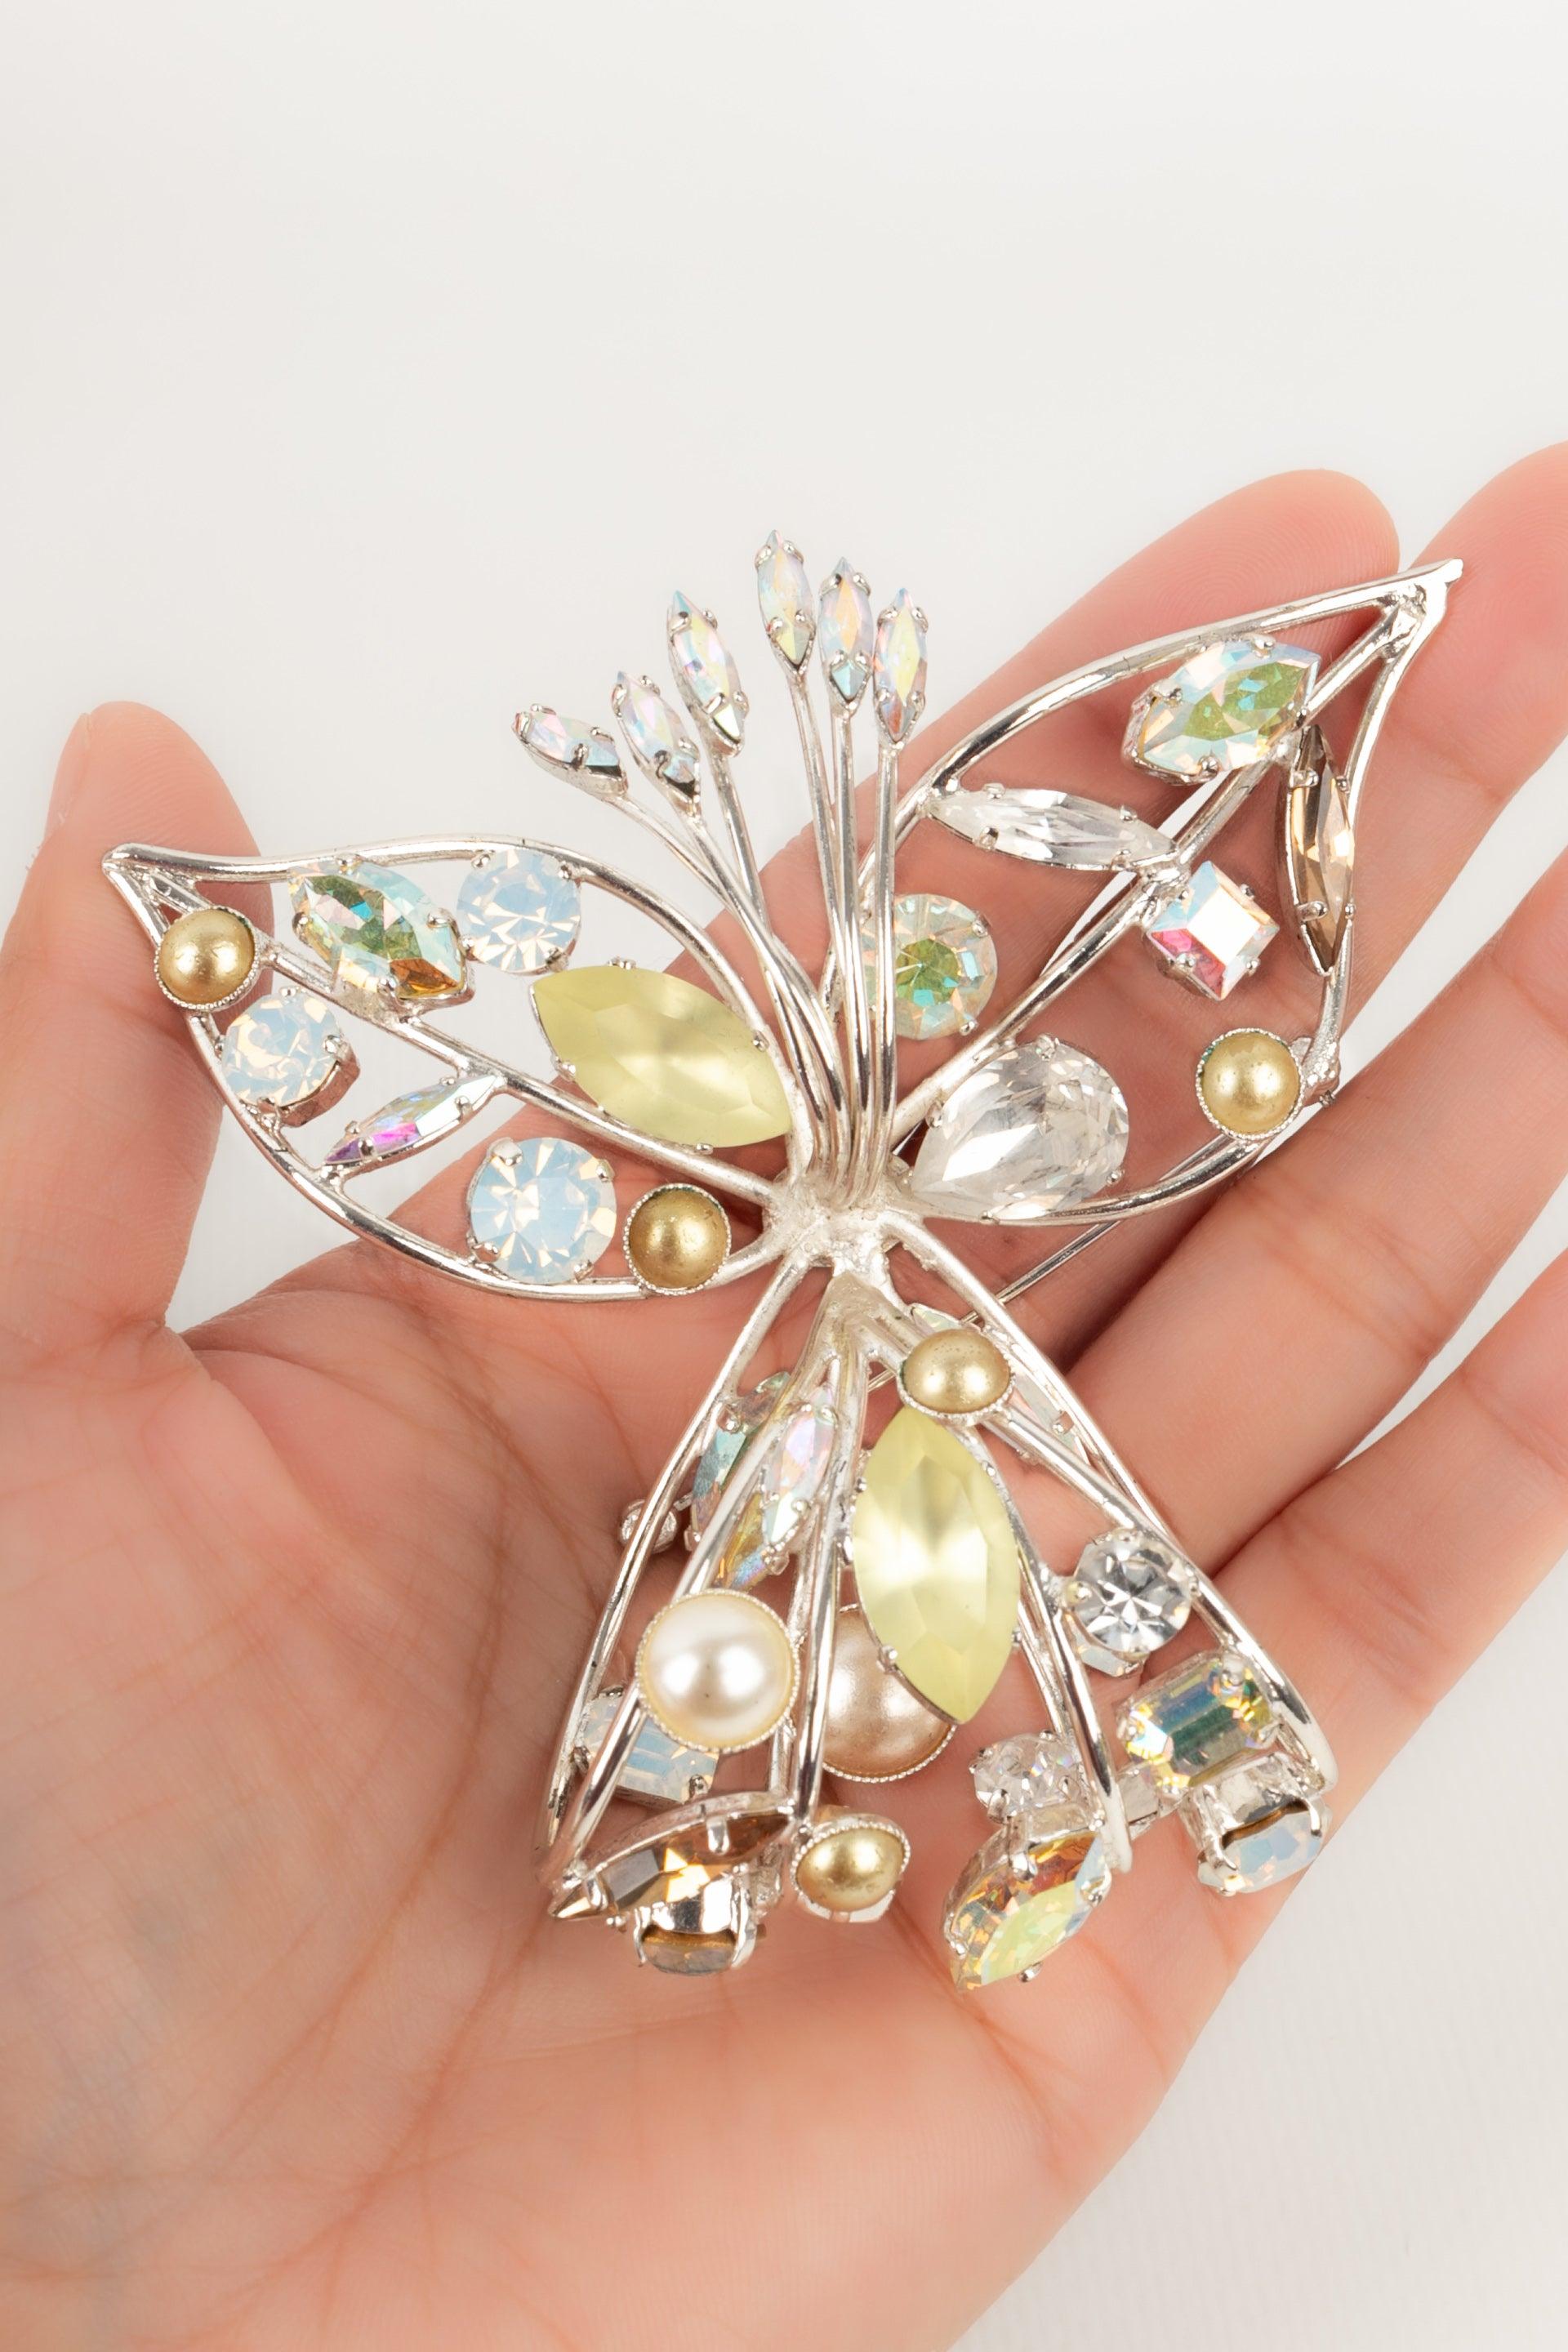 Swarovski - Silvery metal brooch with rhinestones.

Additional information:
Condition: Very good condition
Dimensions: Height: 9 cm

Seller Reference: BR54